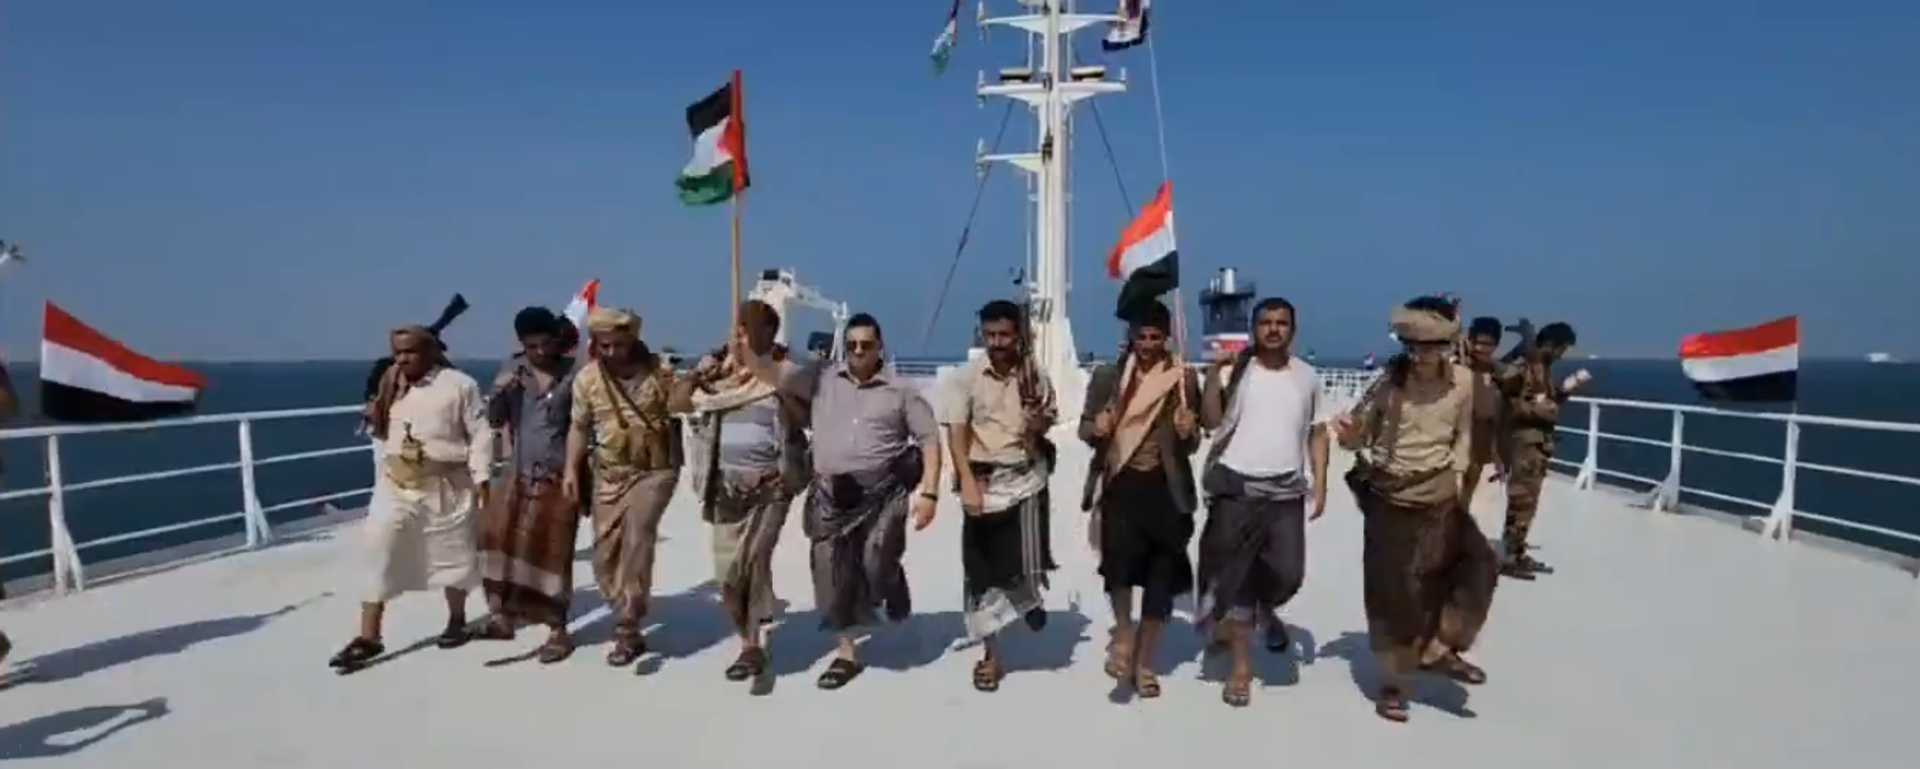 Houthis do their traditional war dance aboard the Galaxy Leader after seizing the Israeli-owned ro-ro car transporter. Screengrab of social media video. - Sputnik International, 1920, 17.12.2023